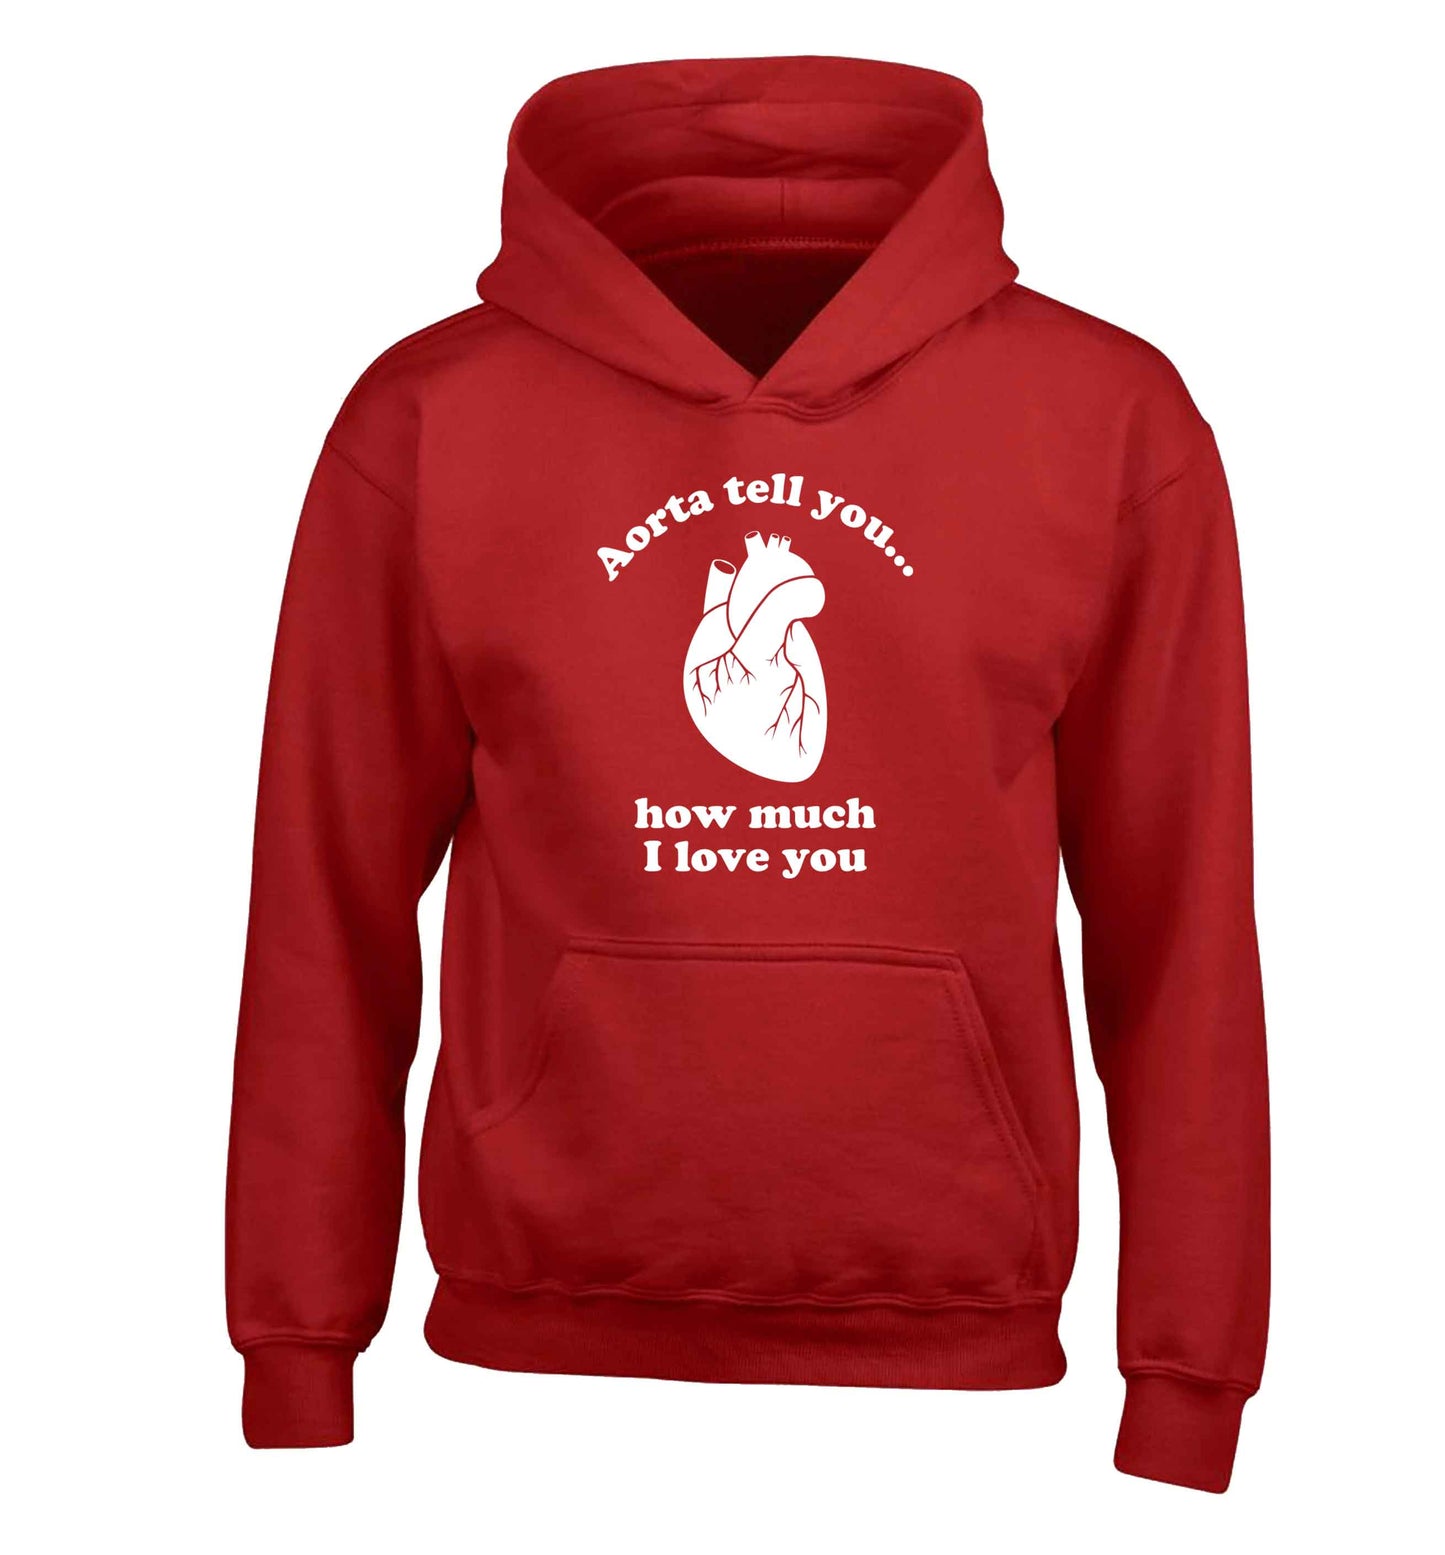 Aorta tell you how much I love you children's red hoodie 12-13 Years